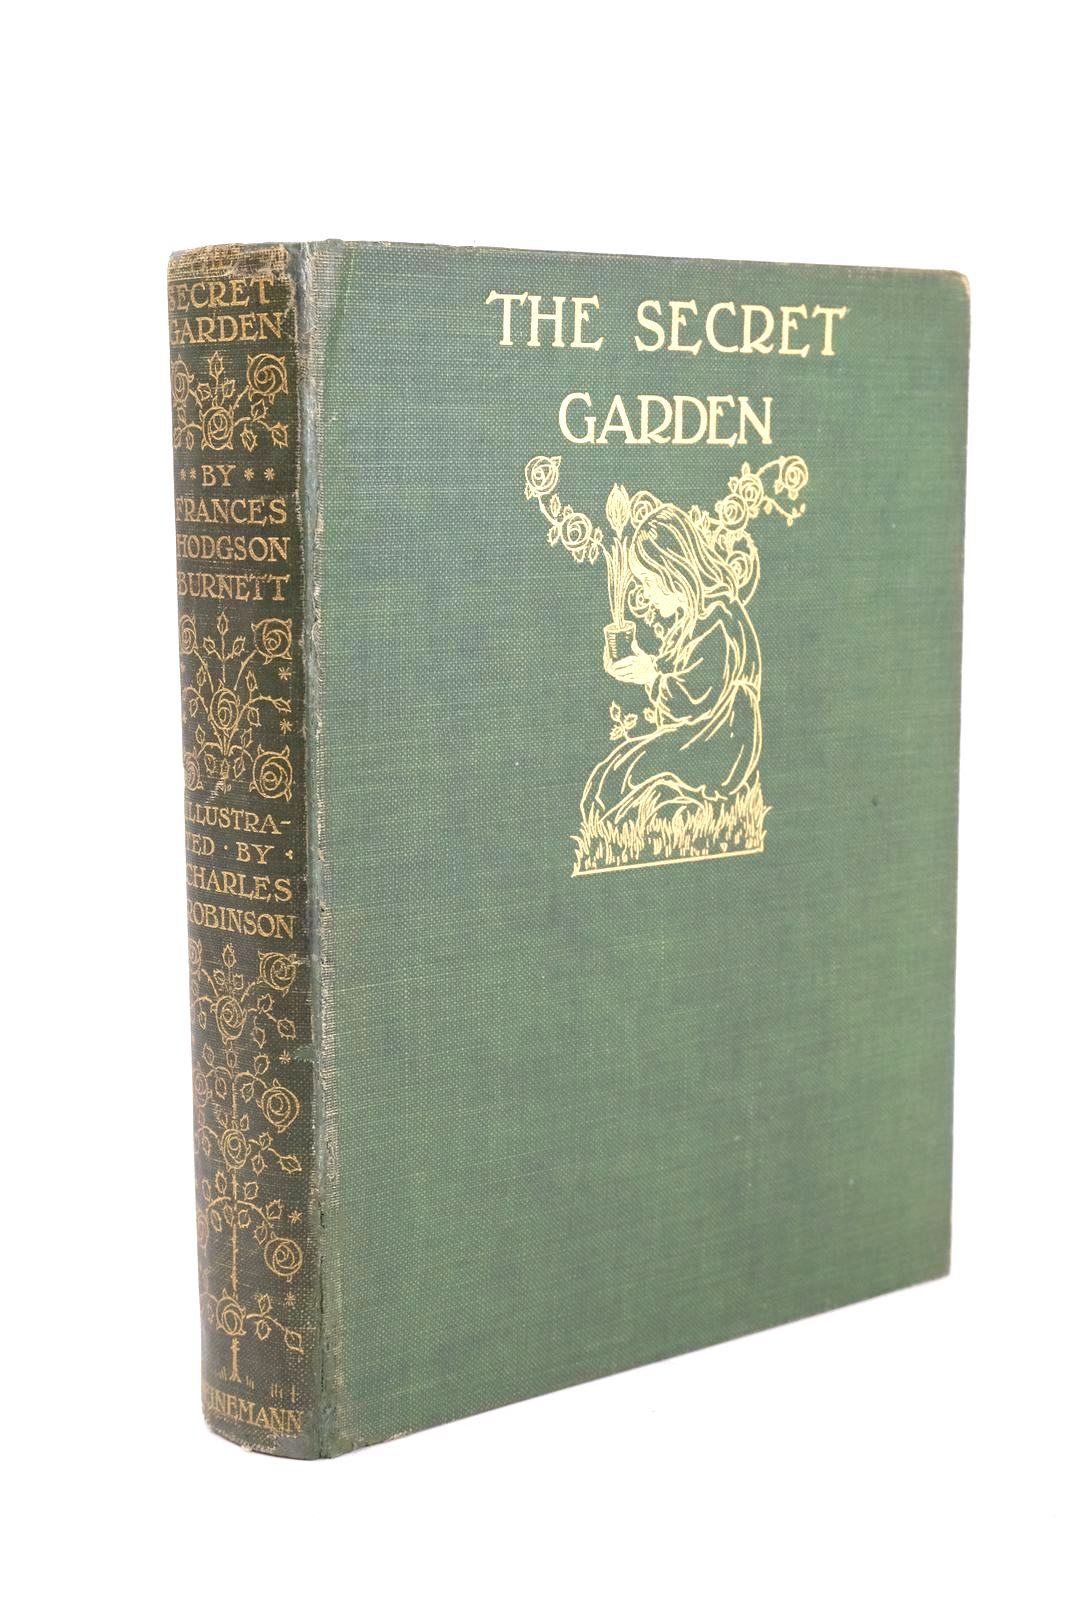 Photo of THE SECRET GARDEN written by Burnett, Frances Hodgson illustrated by Robinson, Charles published by William Heinemann (STOCK CODE: 1325878)  for sale by Stella & Rose's Books